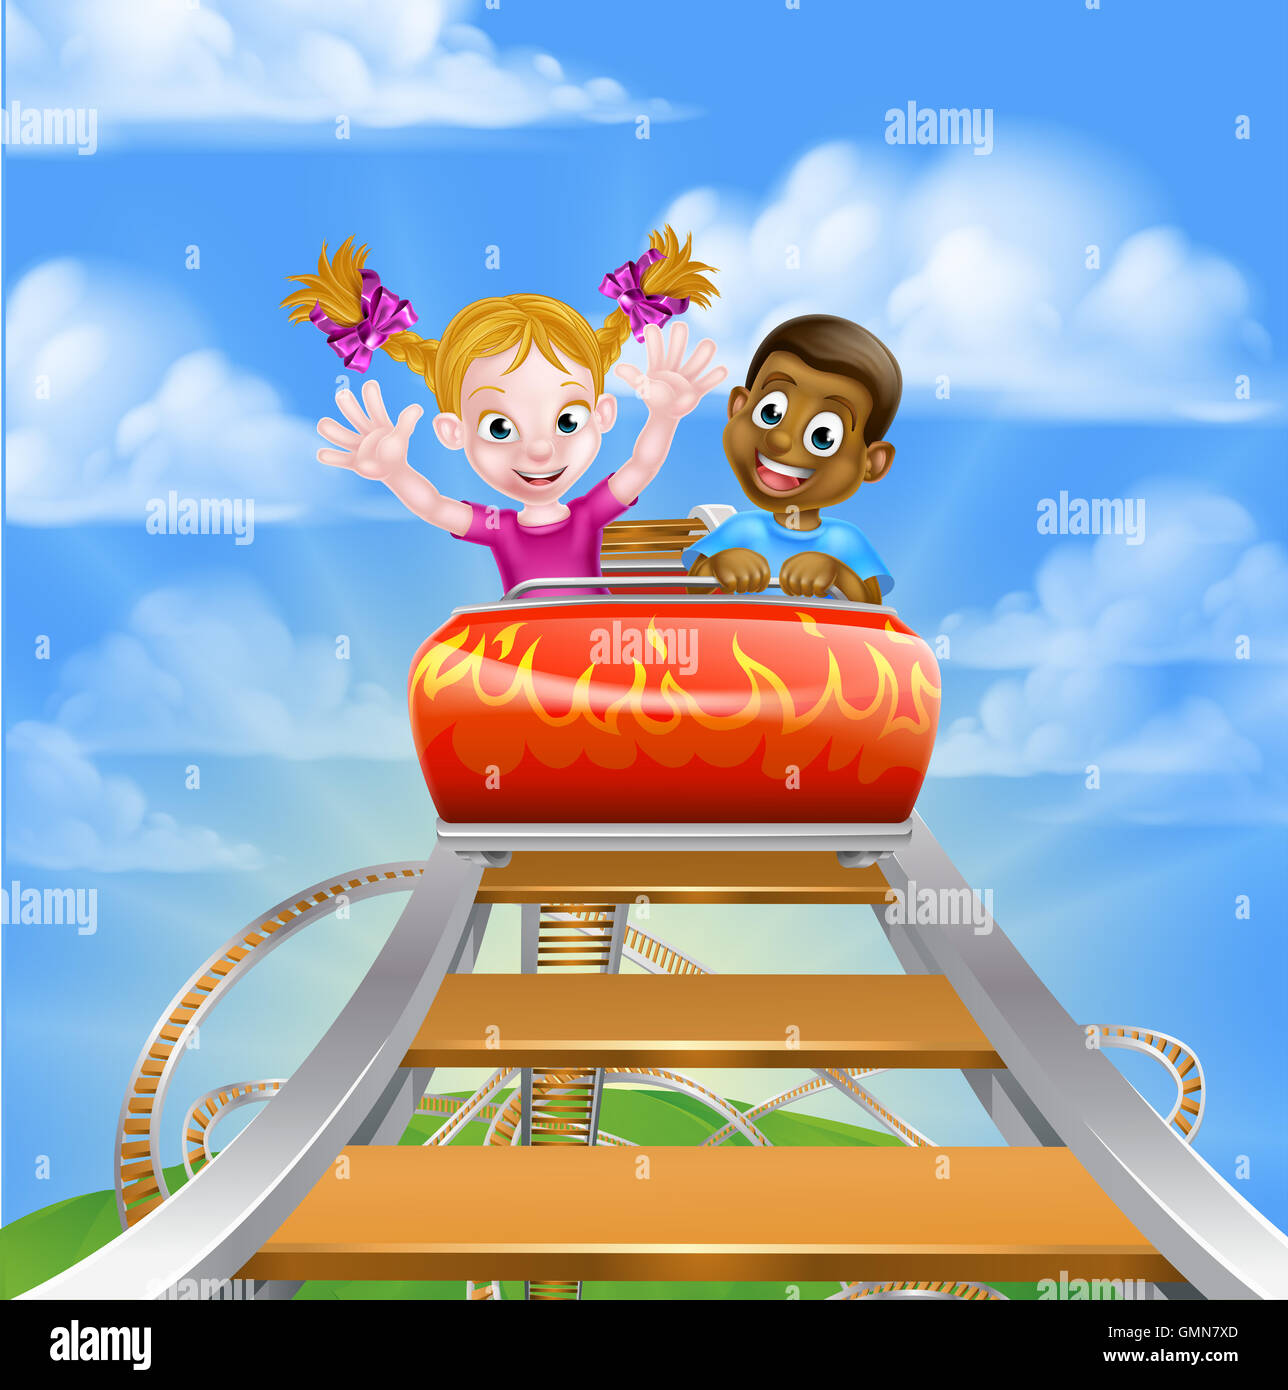 Cartoon boy and girl riding on a roller coaster ride at a theme park or amusement park Stock Photo